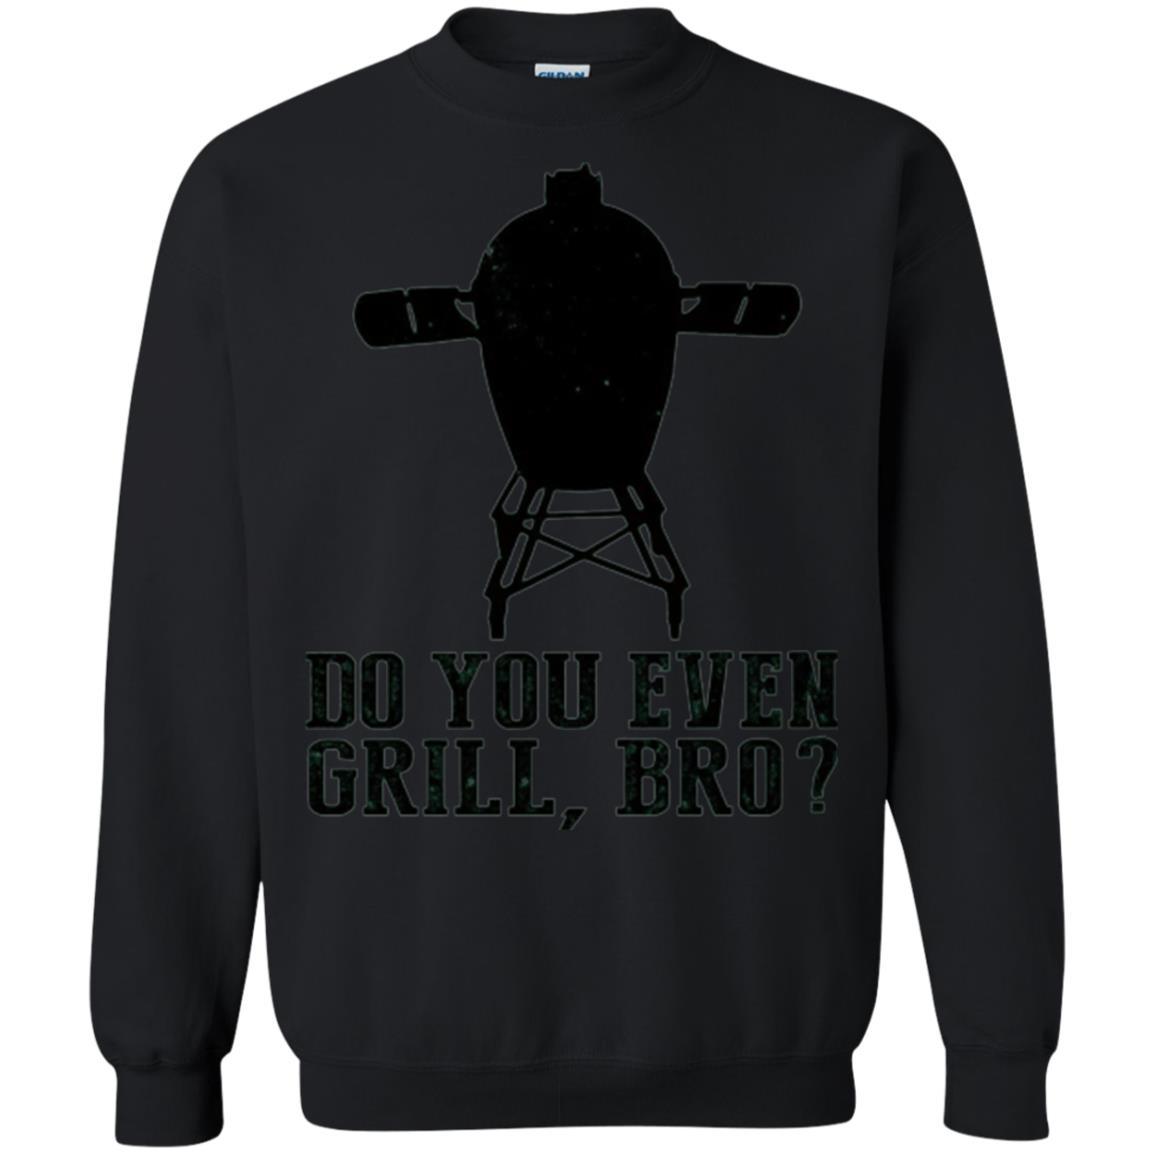 Bbq Grilling T-shirt Do You Even Grill Bro